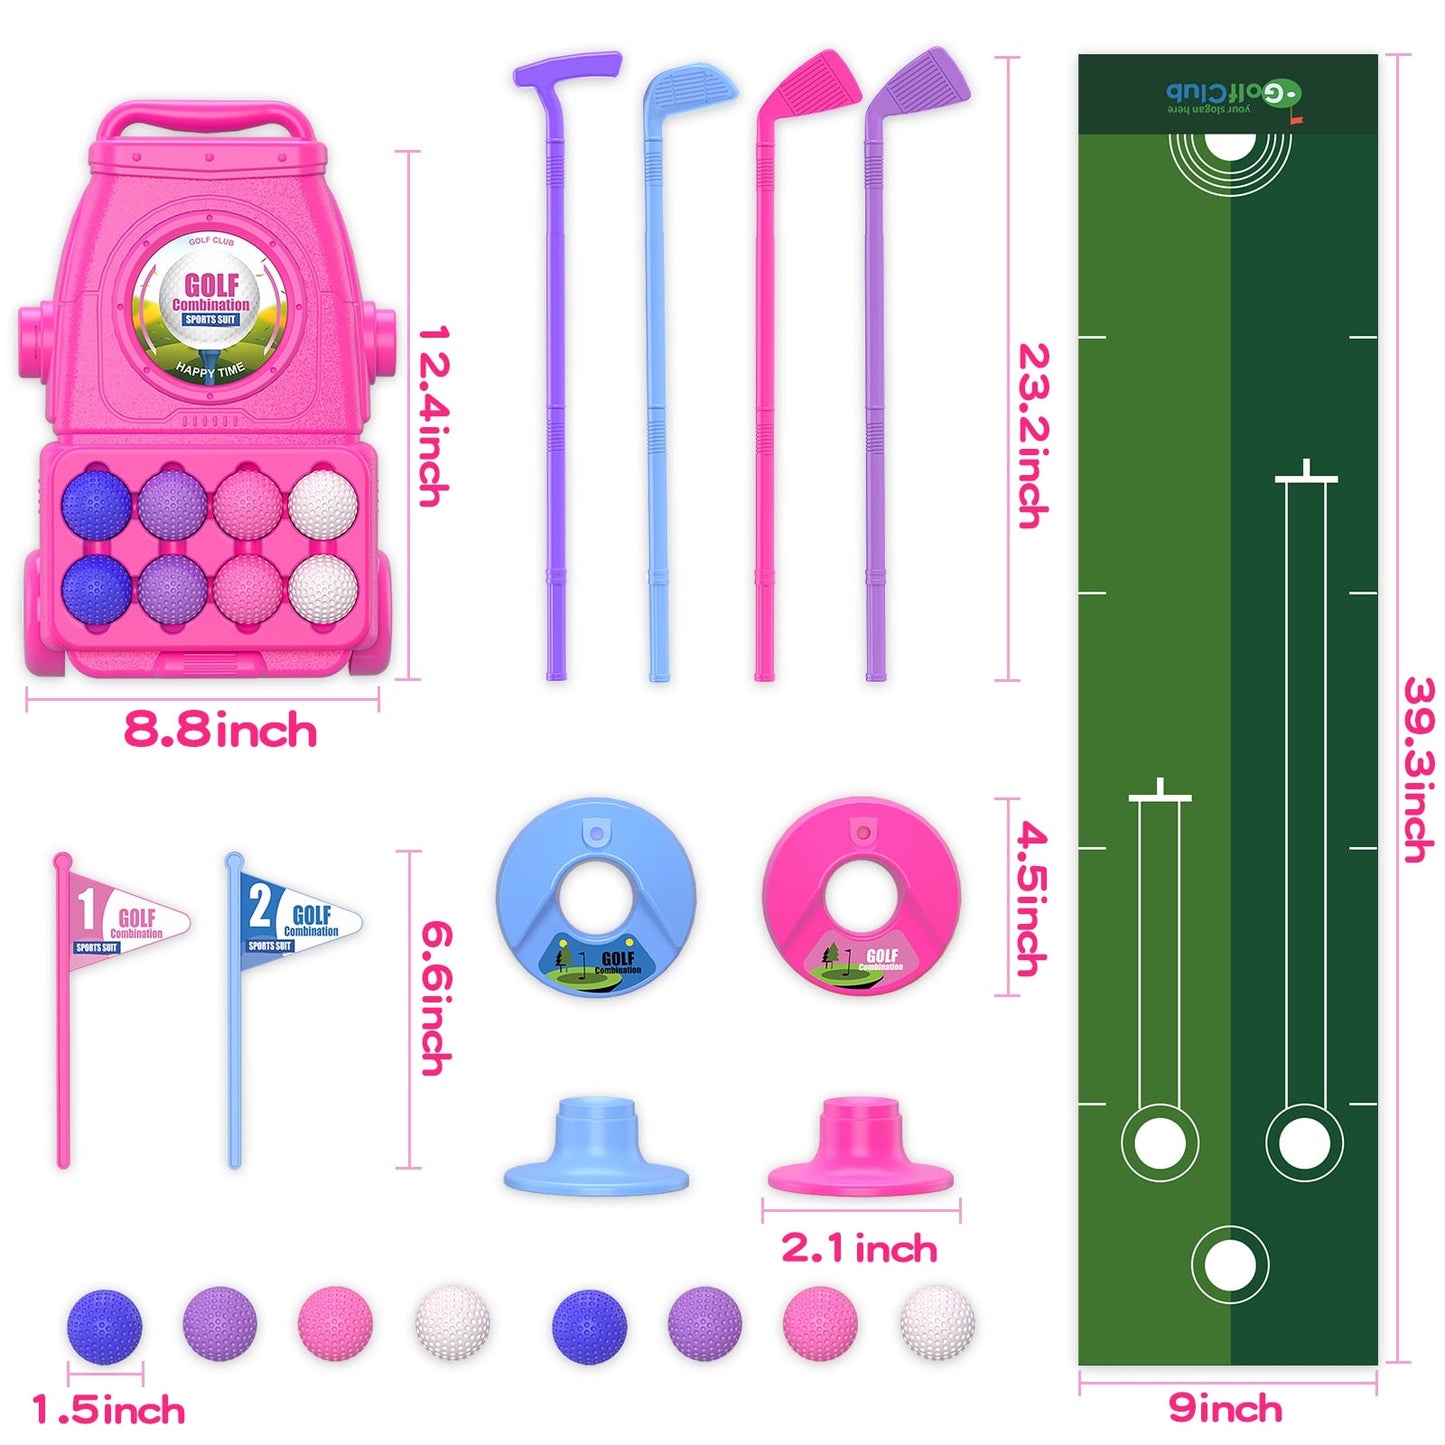 Pink Toddler Golf Set with 6 Balls, 4 Sticks, 2 Holes, and Putting Mat - Kids' Toys for Girls Aged 2-5+